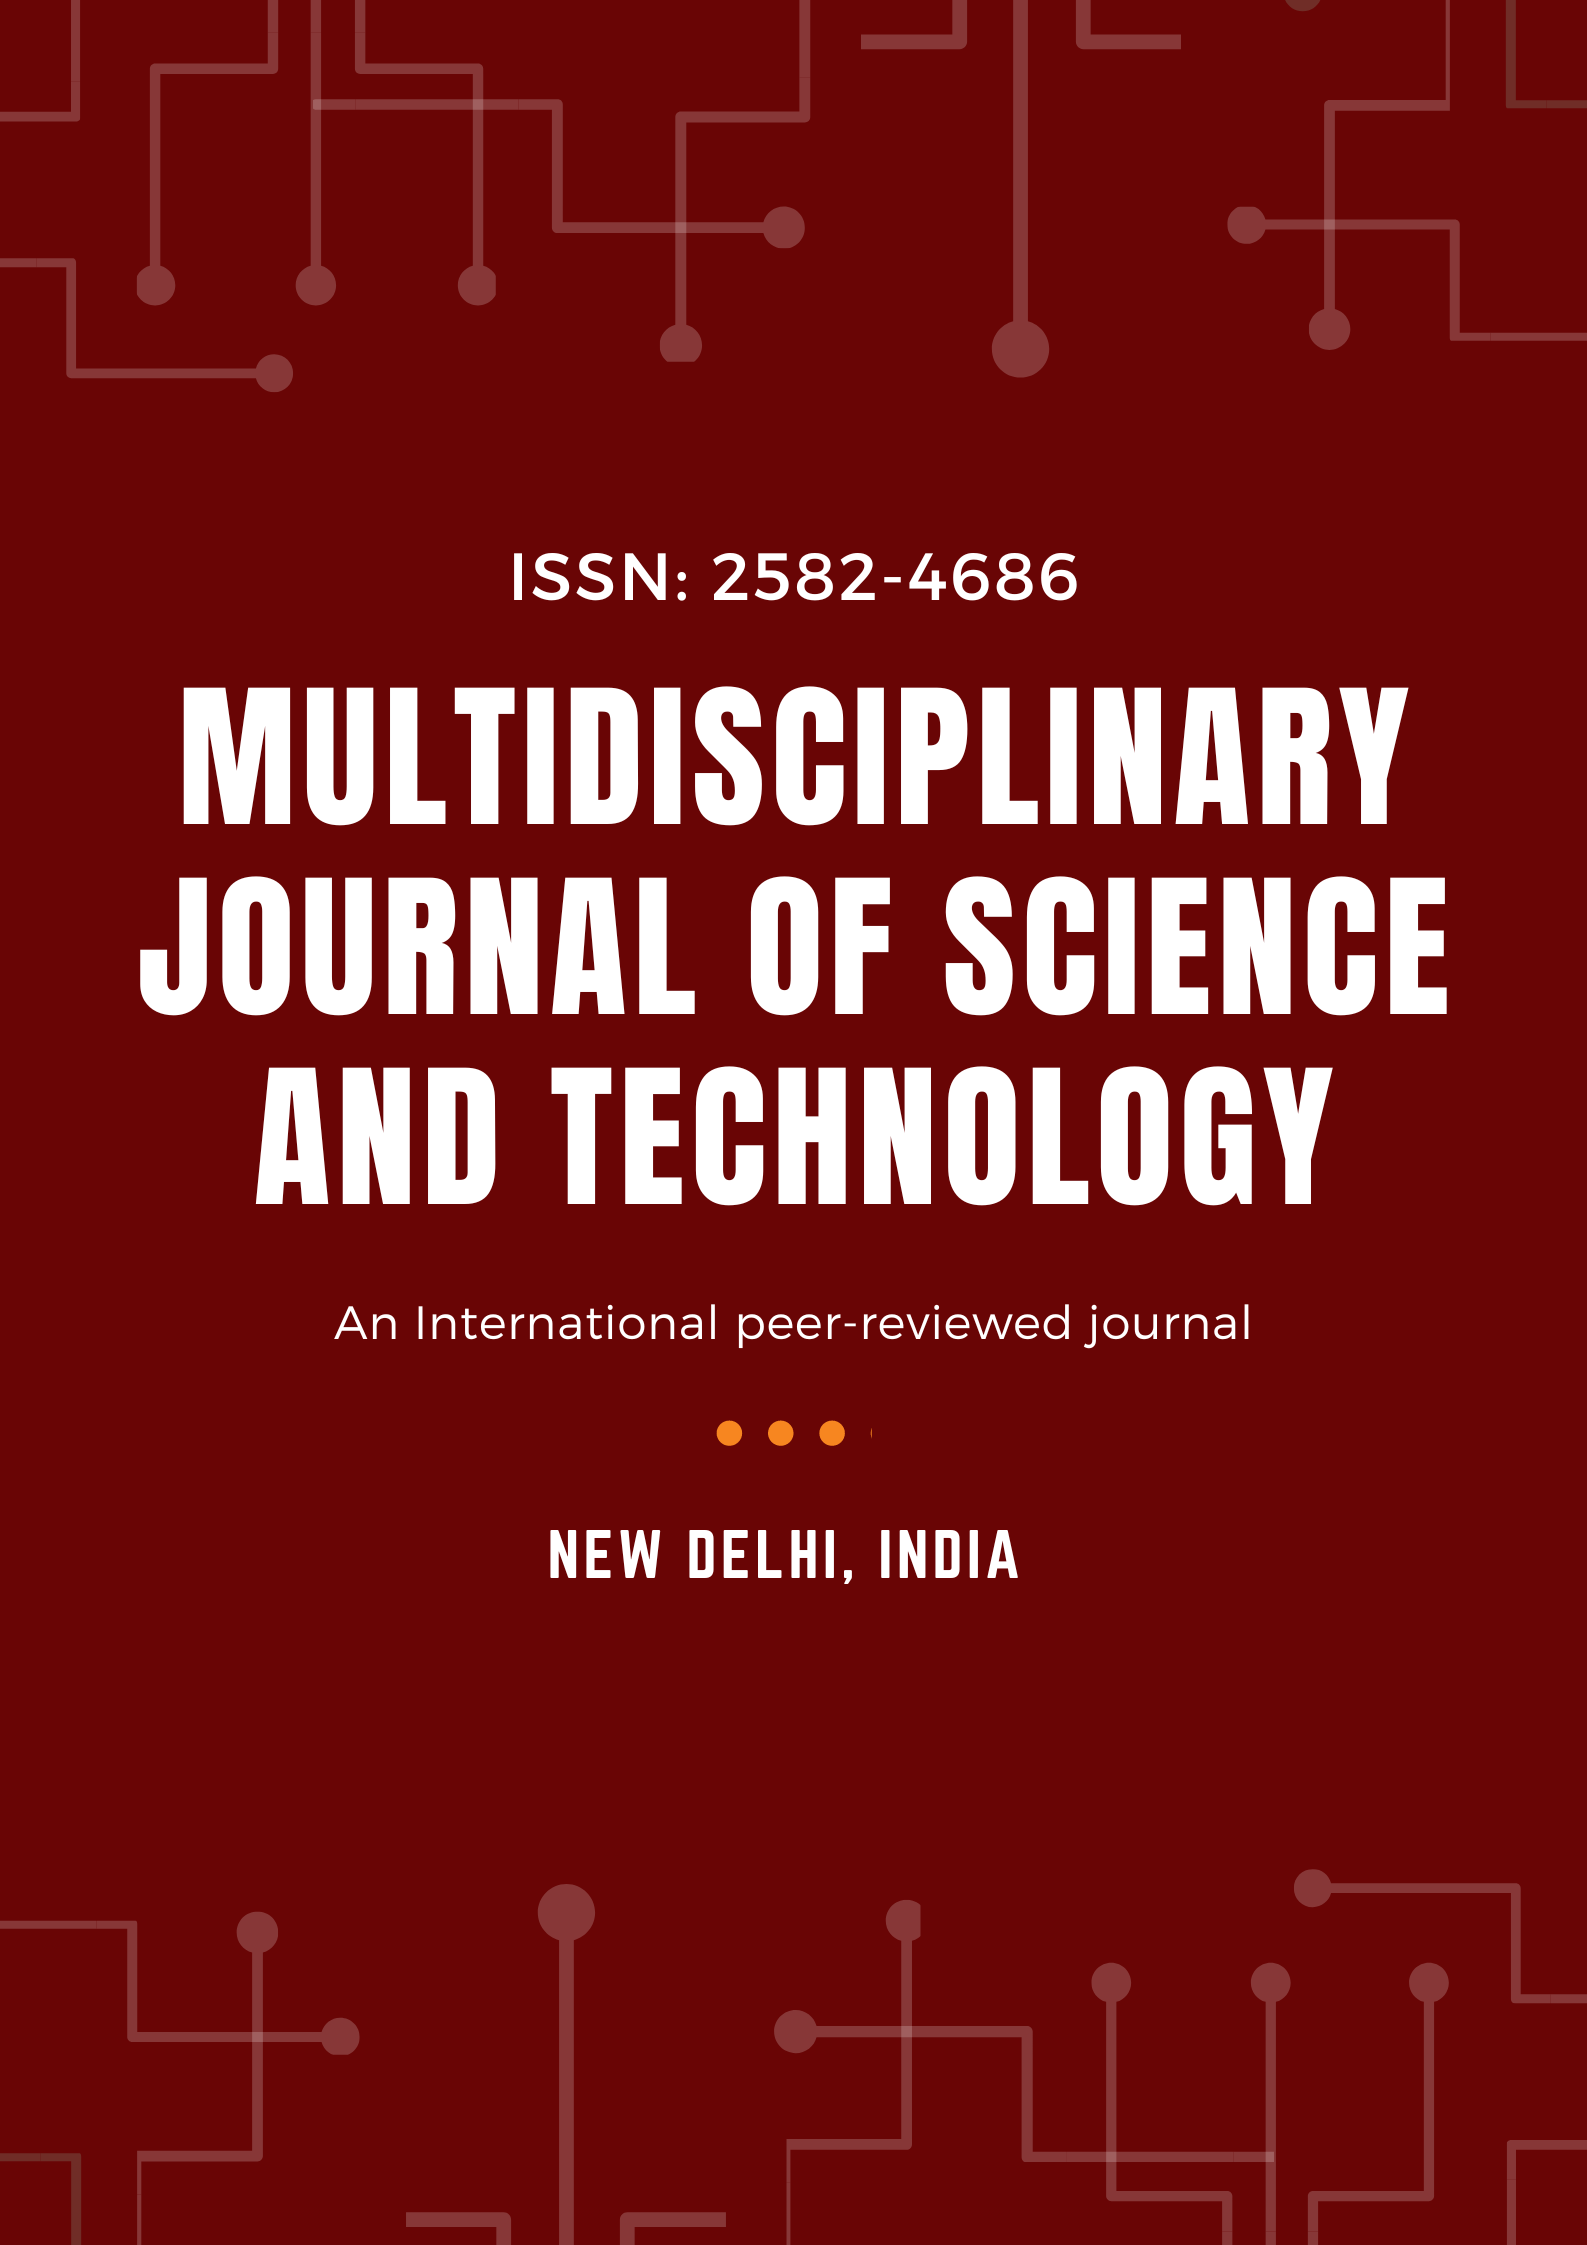                         View Vol. 1 No. 1 (2021): Multidisciplinary Journal of Science and Technology
                    